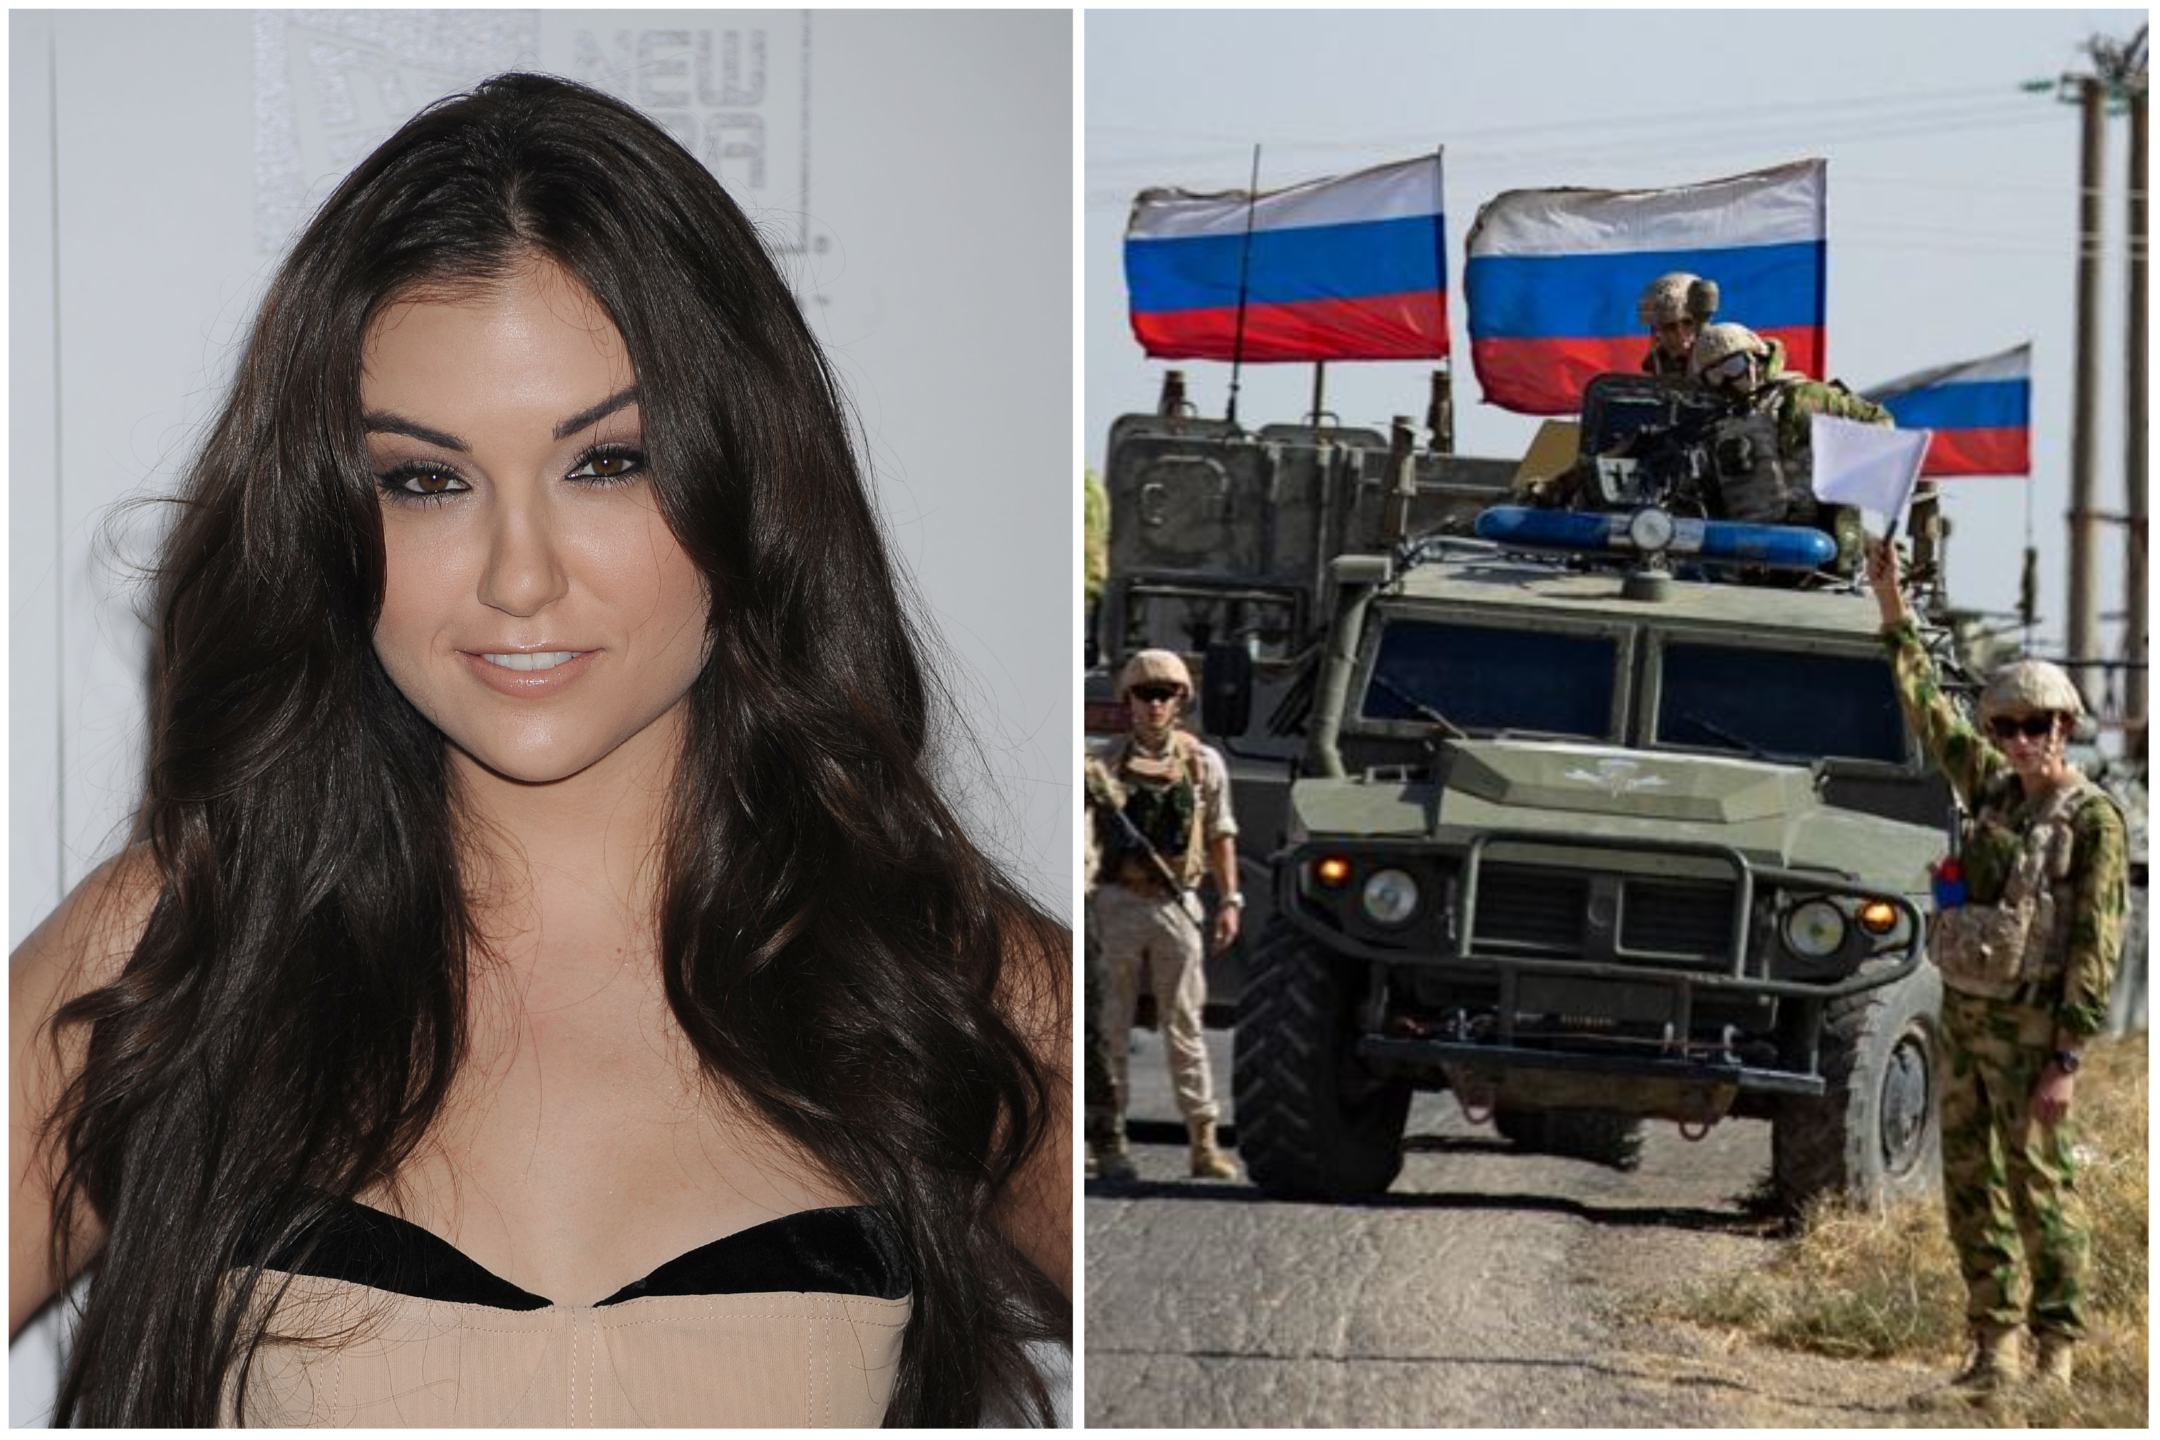 Fact Check Was Ex-Adult Film Star Sasha Grey in Russian Military Promo? pic